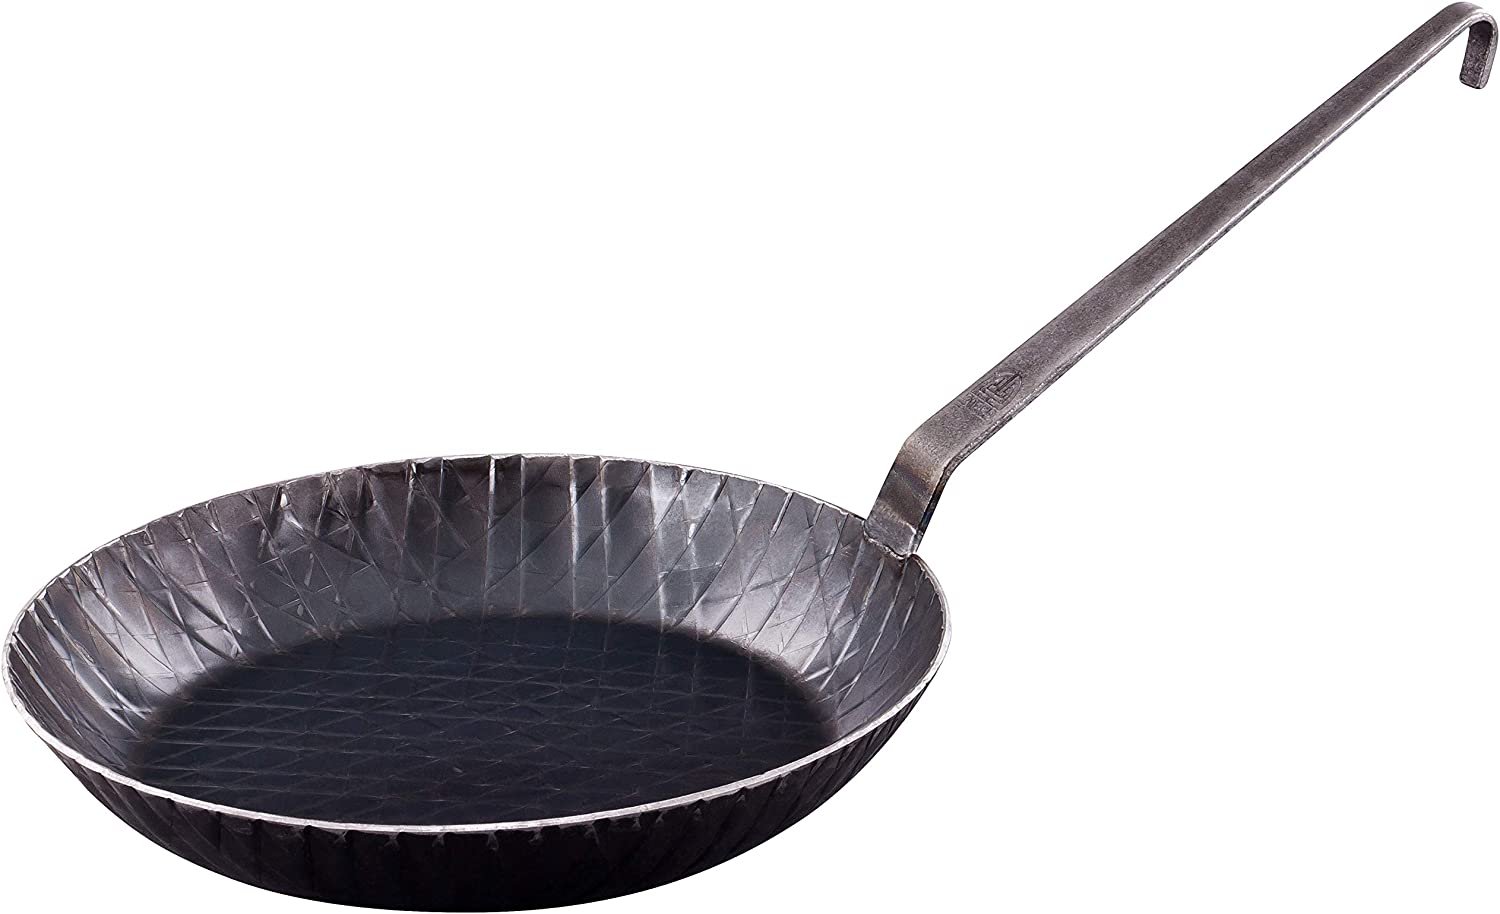 GRAWE Gräwe, Wrought Iron Frying Pan with Hook Handle, 28 cm in Diameter, Extra High Rim, Uncoated Professional Pan, Ø 28 cm